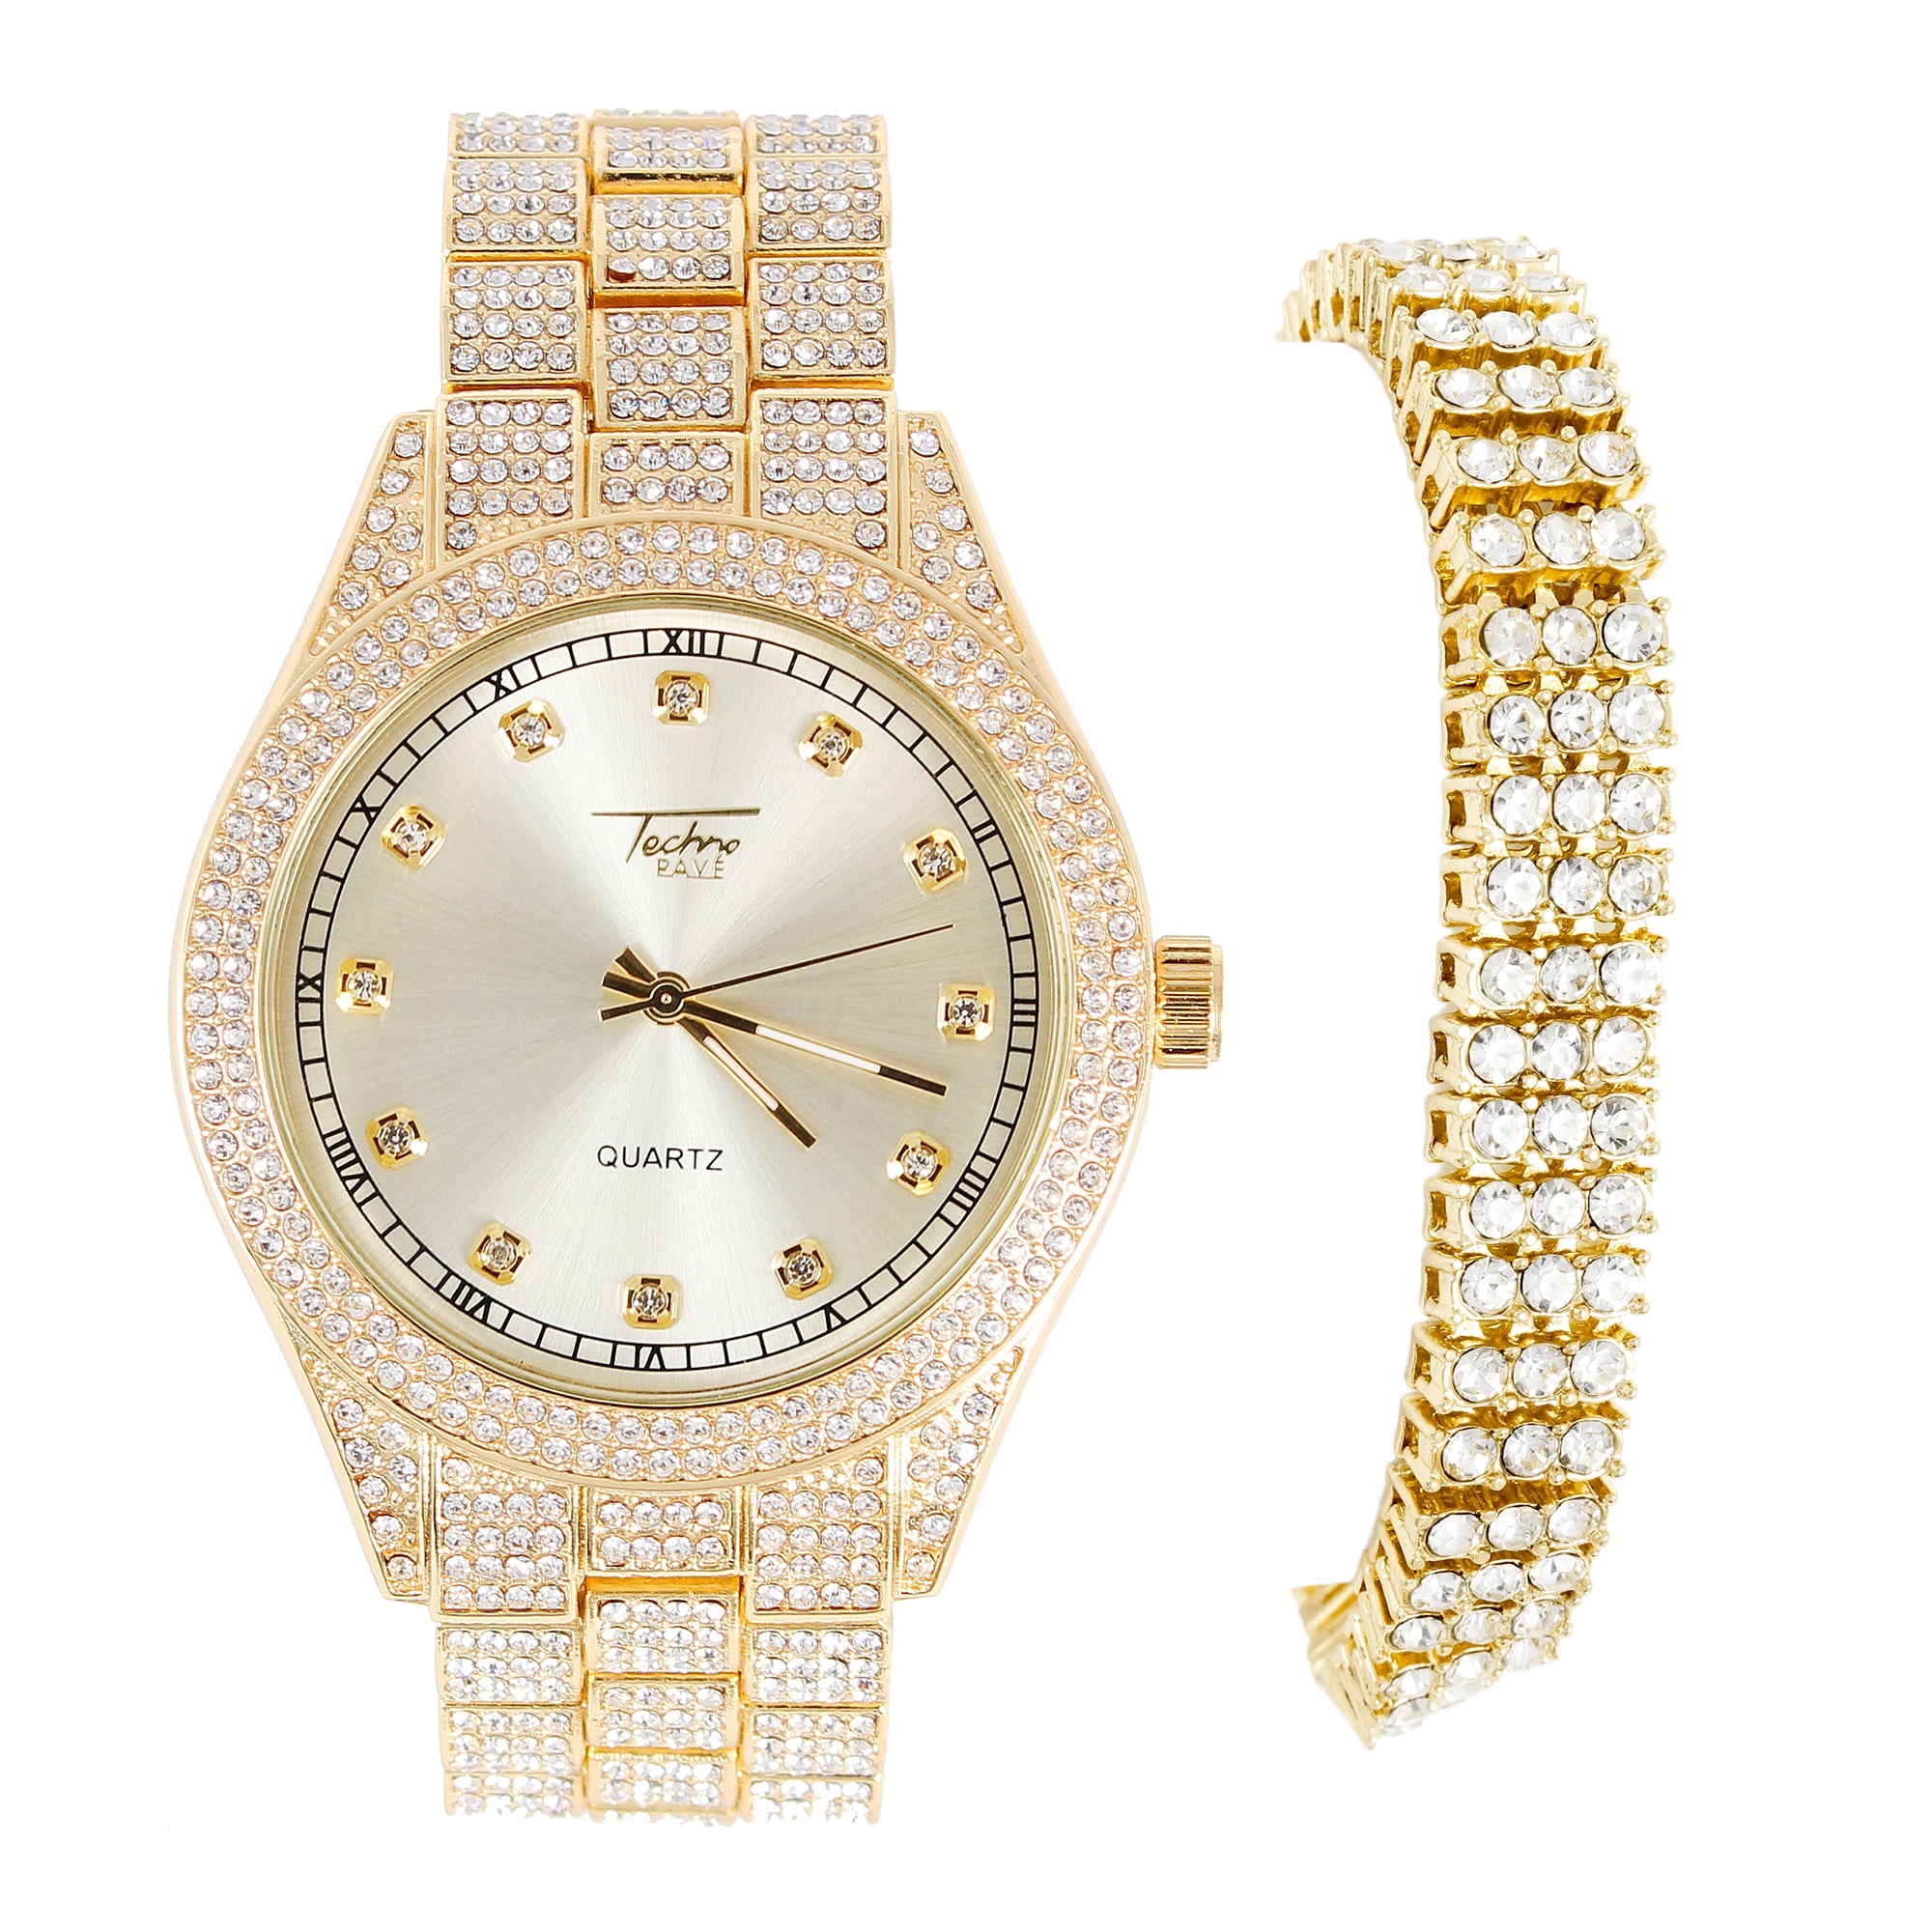 Techno Pave - Mens Watch and Tennis Bracelet Combo Set - Gold 43mm Iced ...